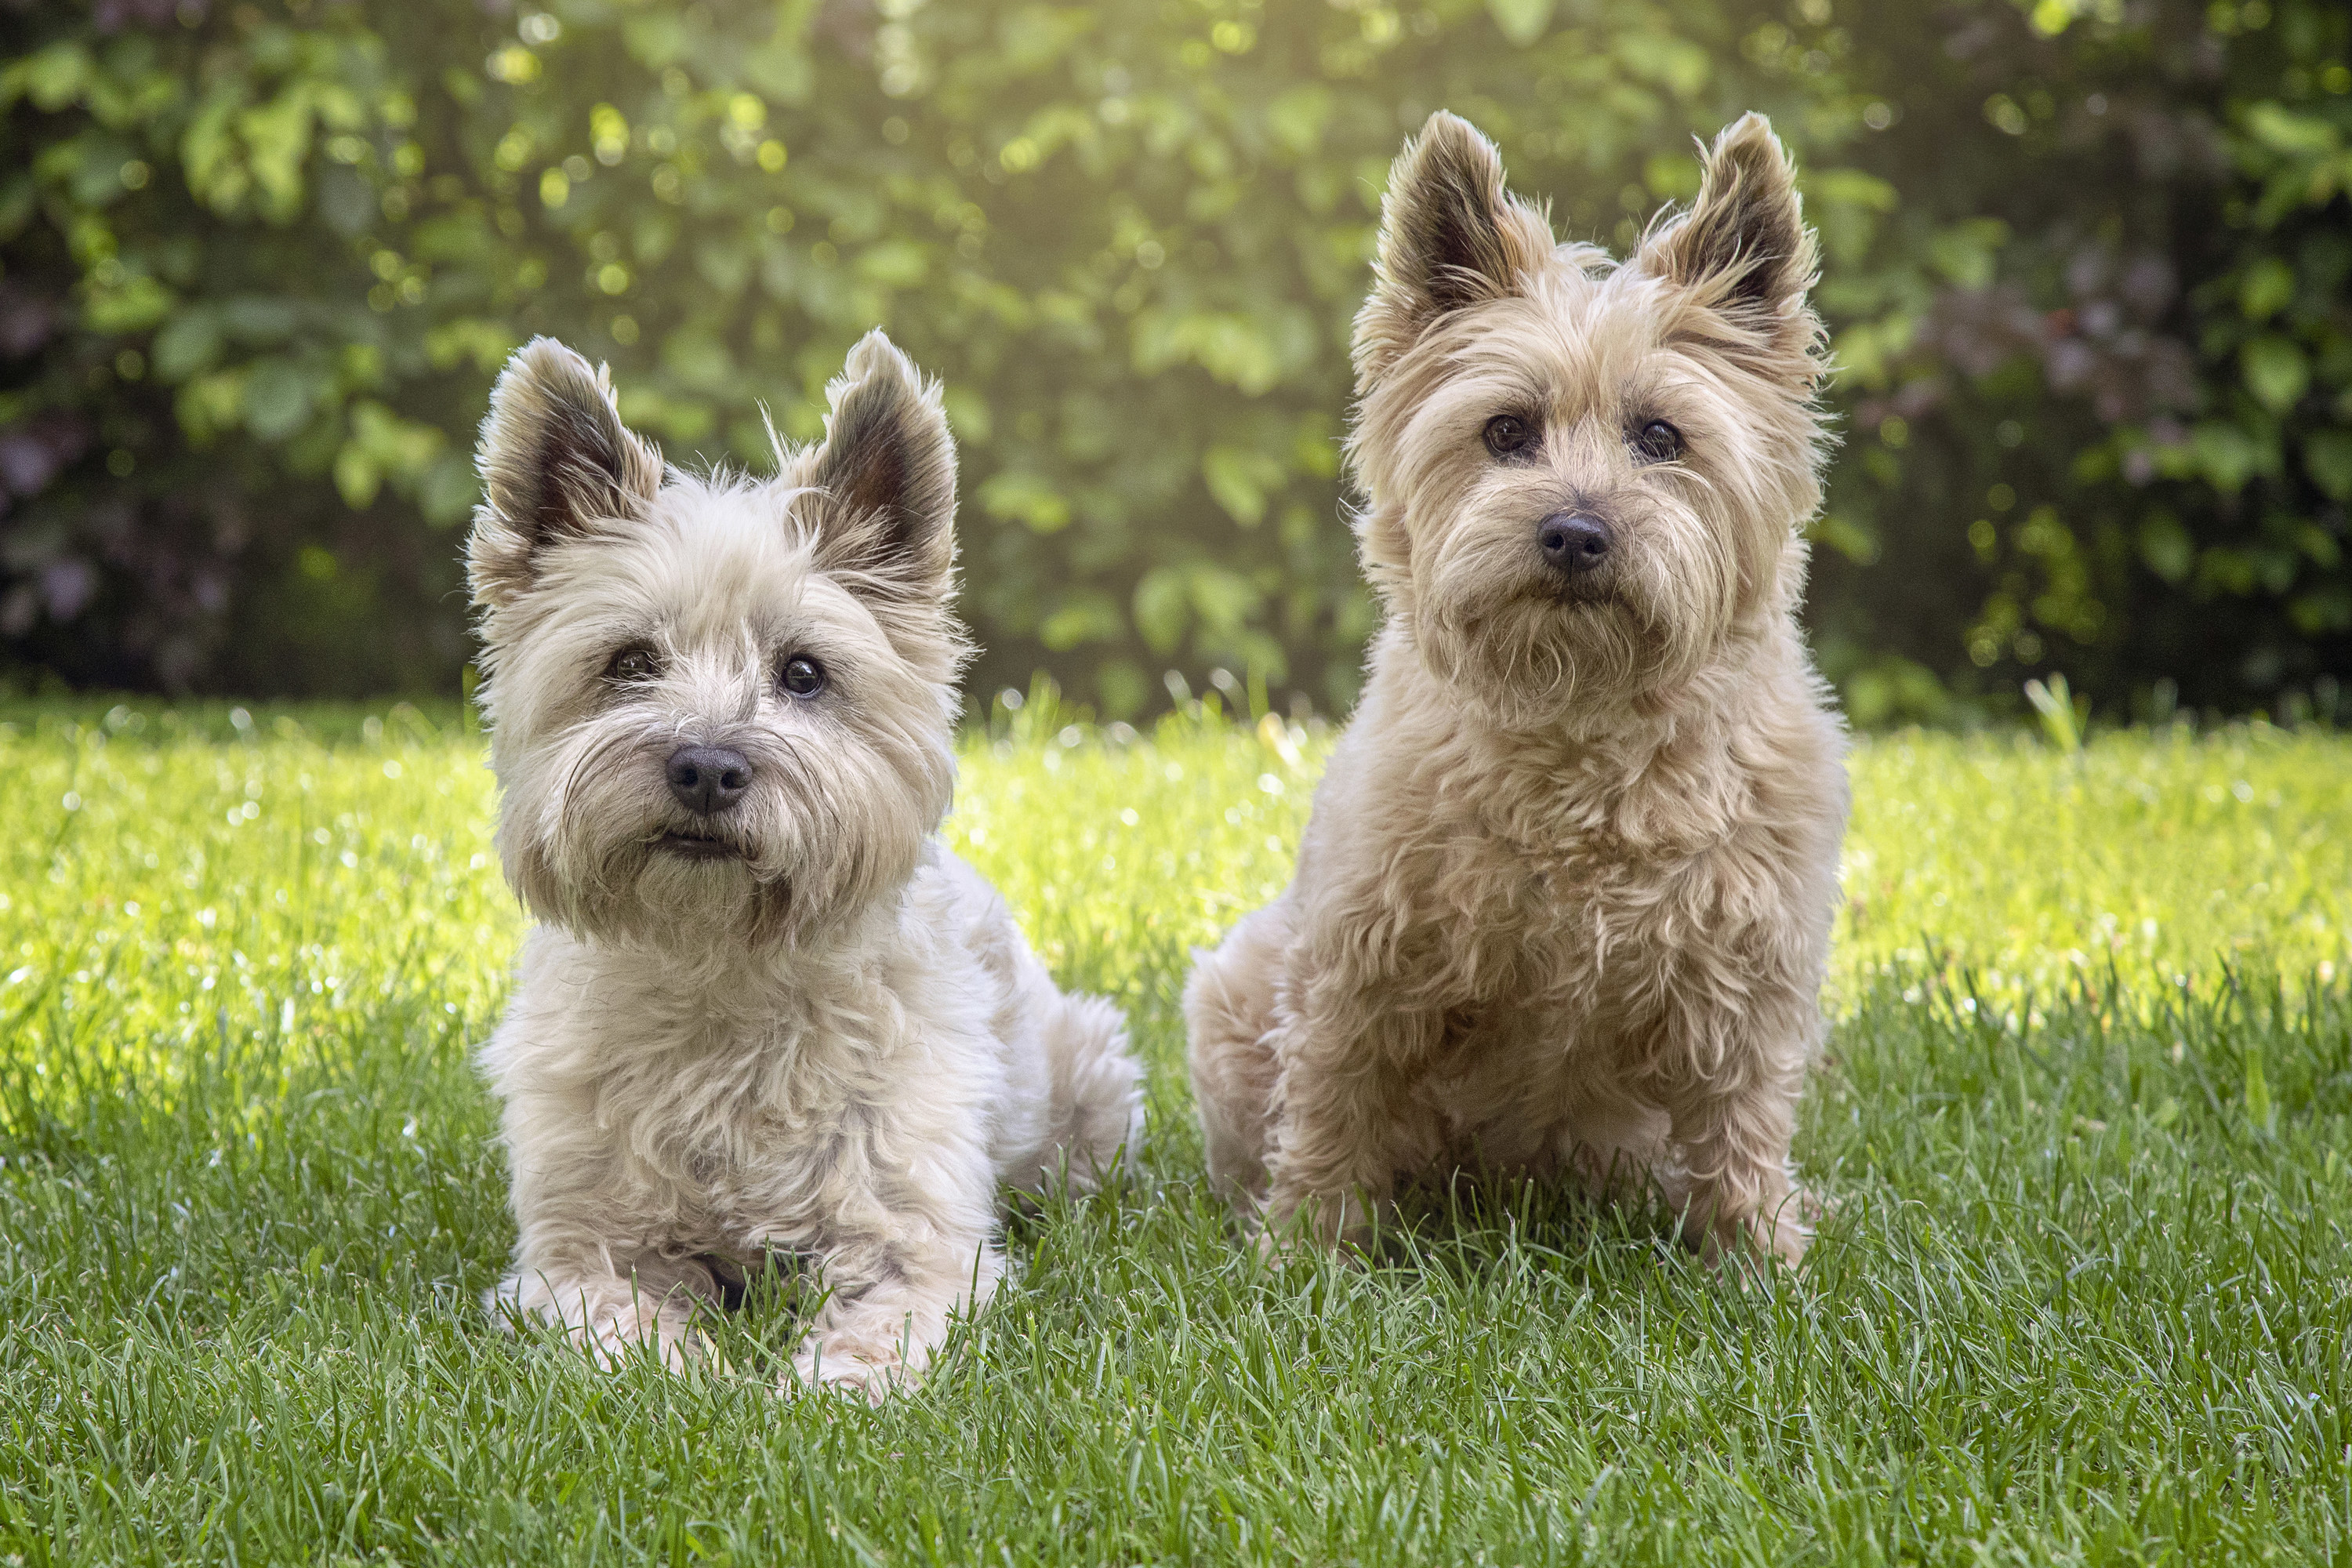 Two Cairn Terrier dogs sitting in grass